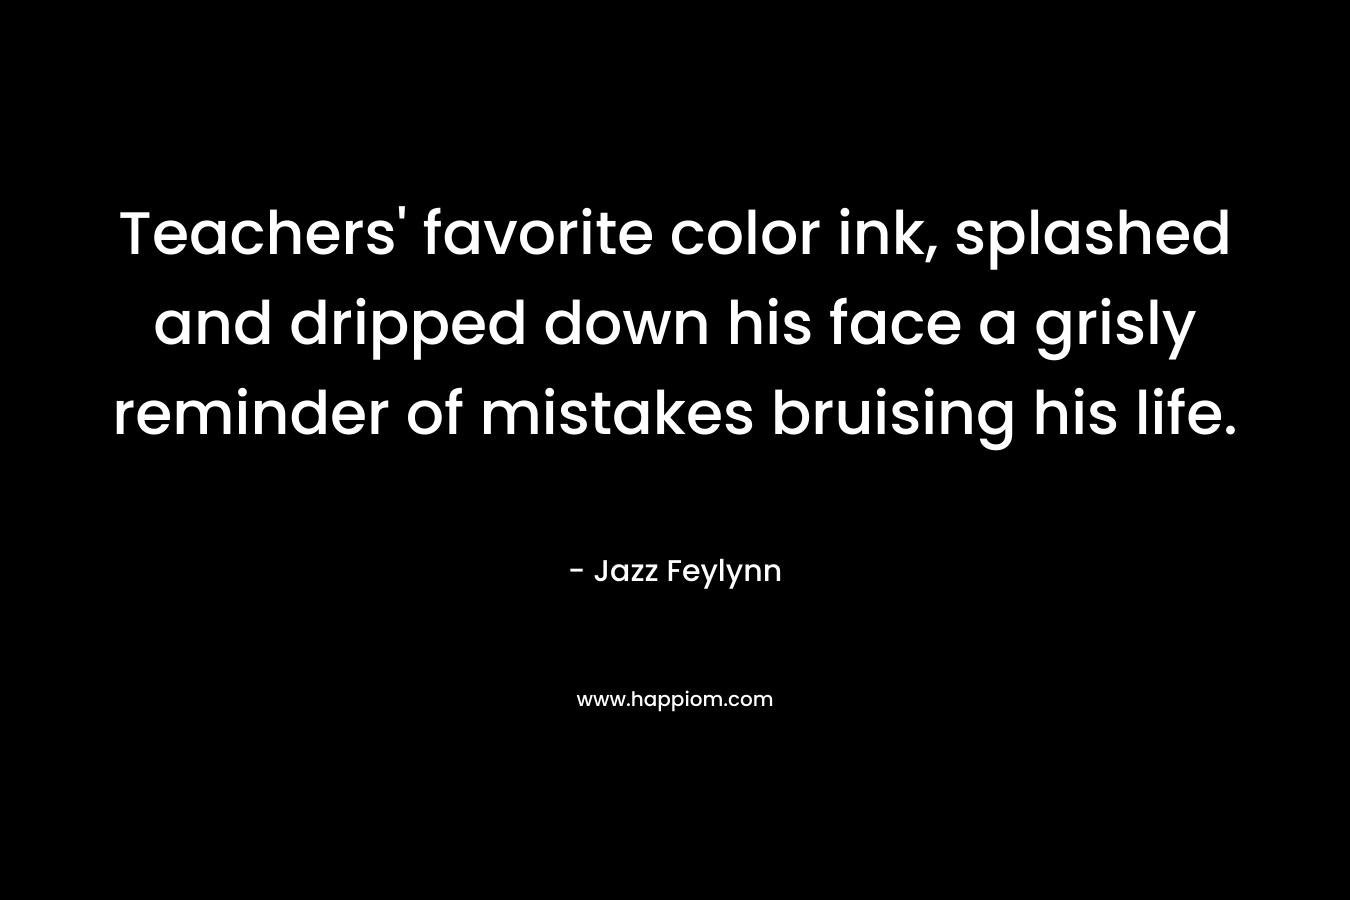 Teachers’ favorite color ink, splashed and dripped down his face a grisly reminder of mistakes bruising his life. – Jazz Feylynn